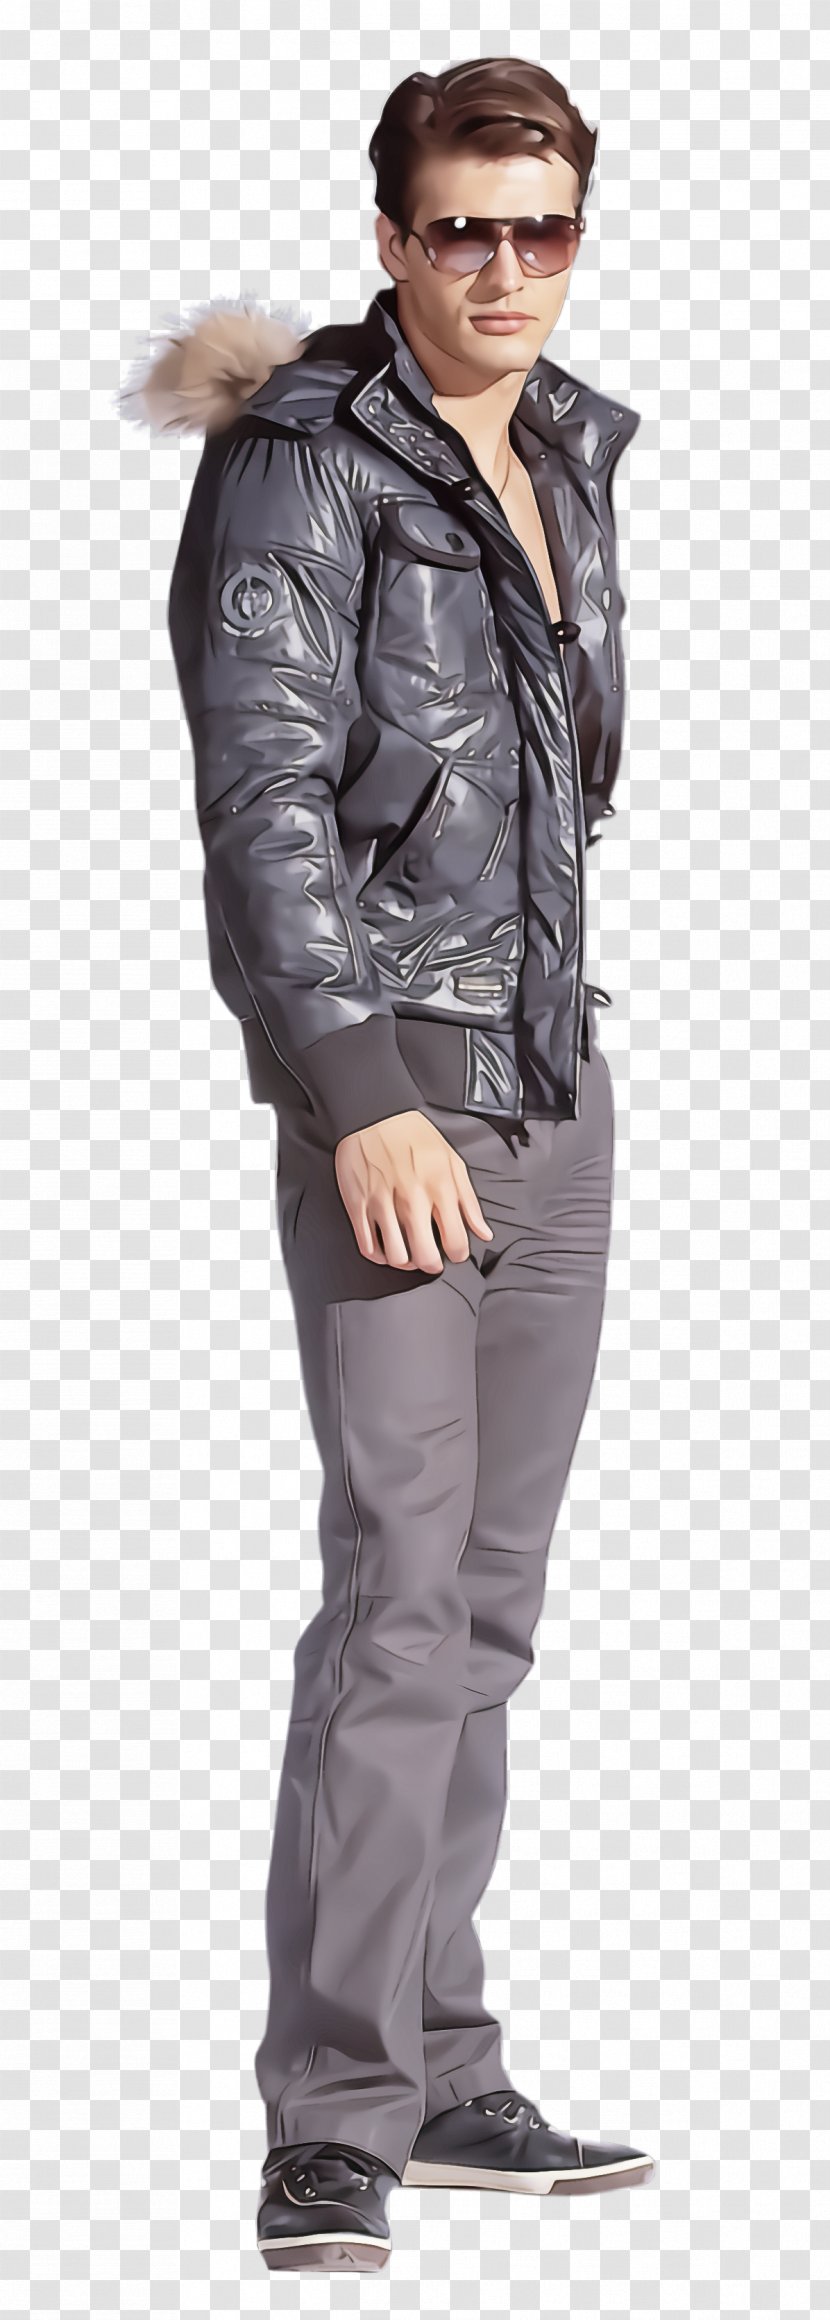 Clothing Jacket Leather Outerwear - Standing - Footwear Textile Transparent PNG